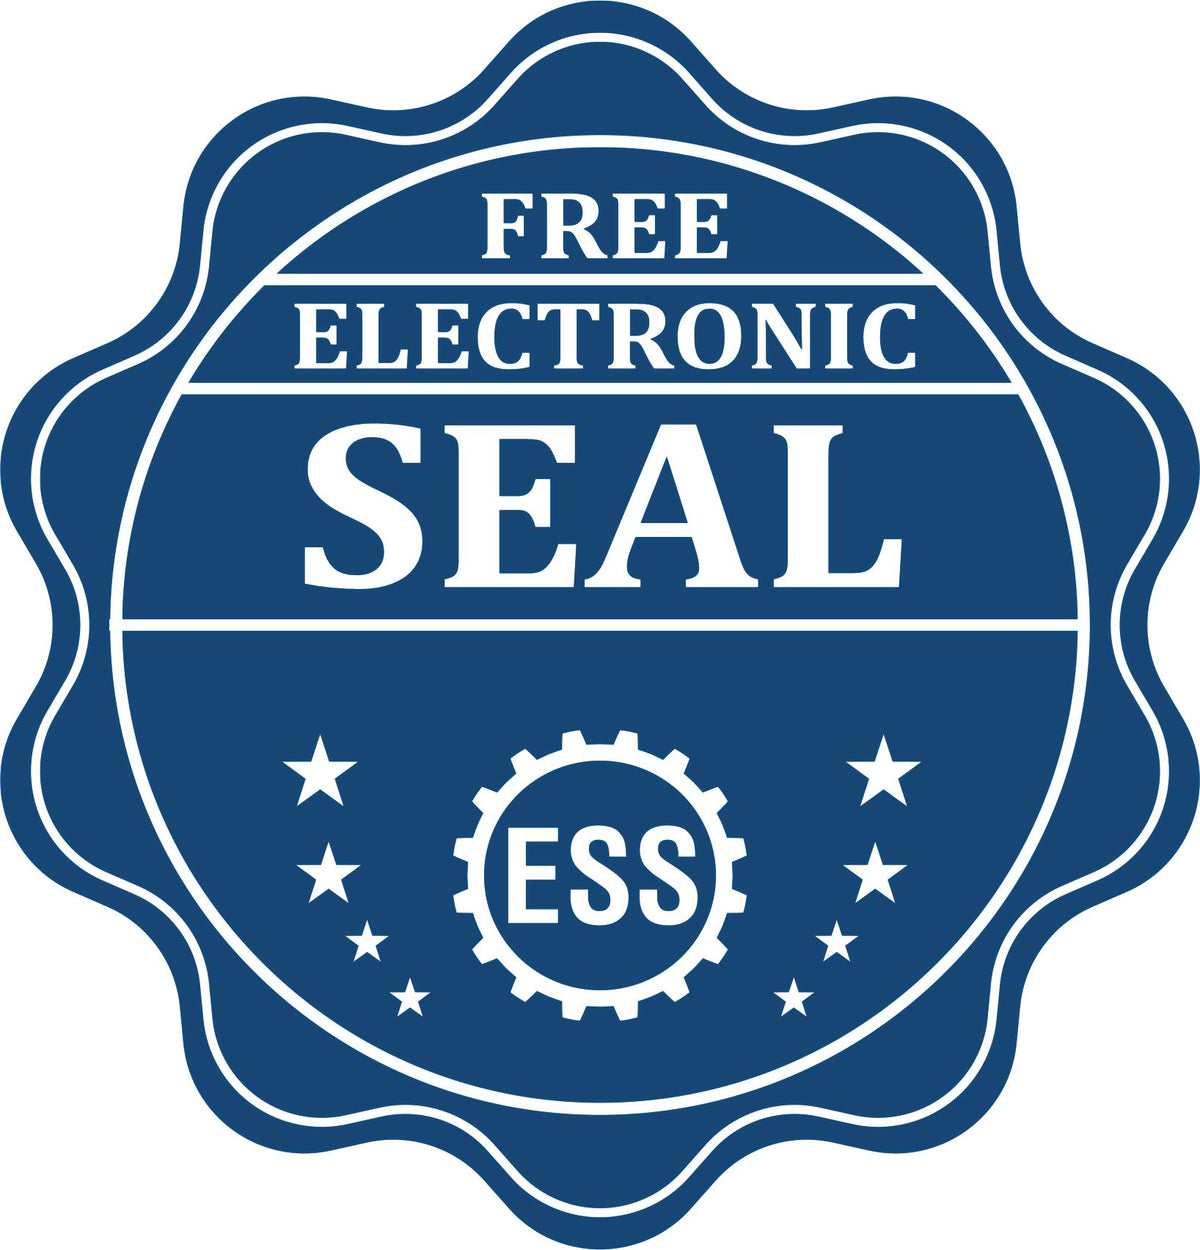 A badge showing a free electronic seal for the Self-Inking New York Landscape Architect Stamp with stars and the ESS gear on the emblem.